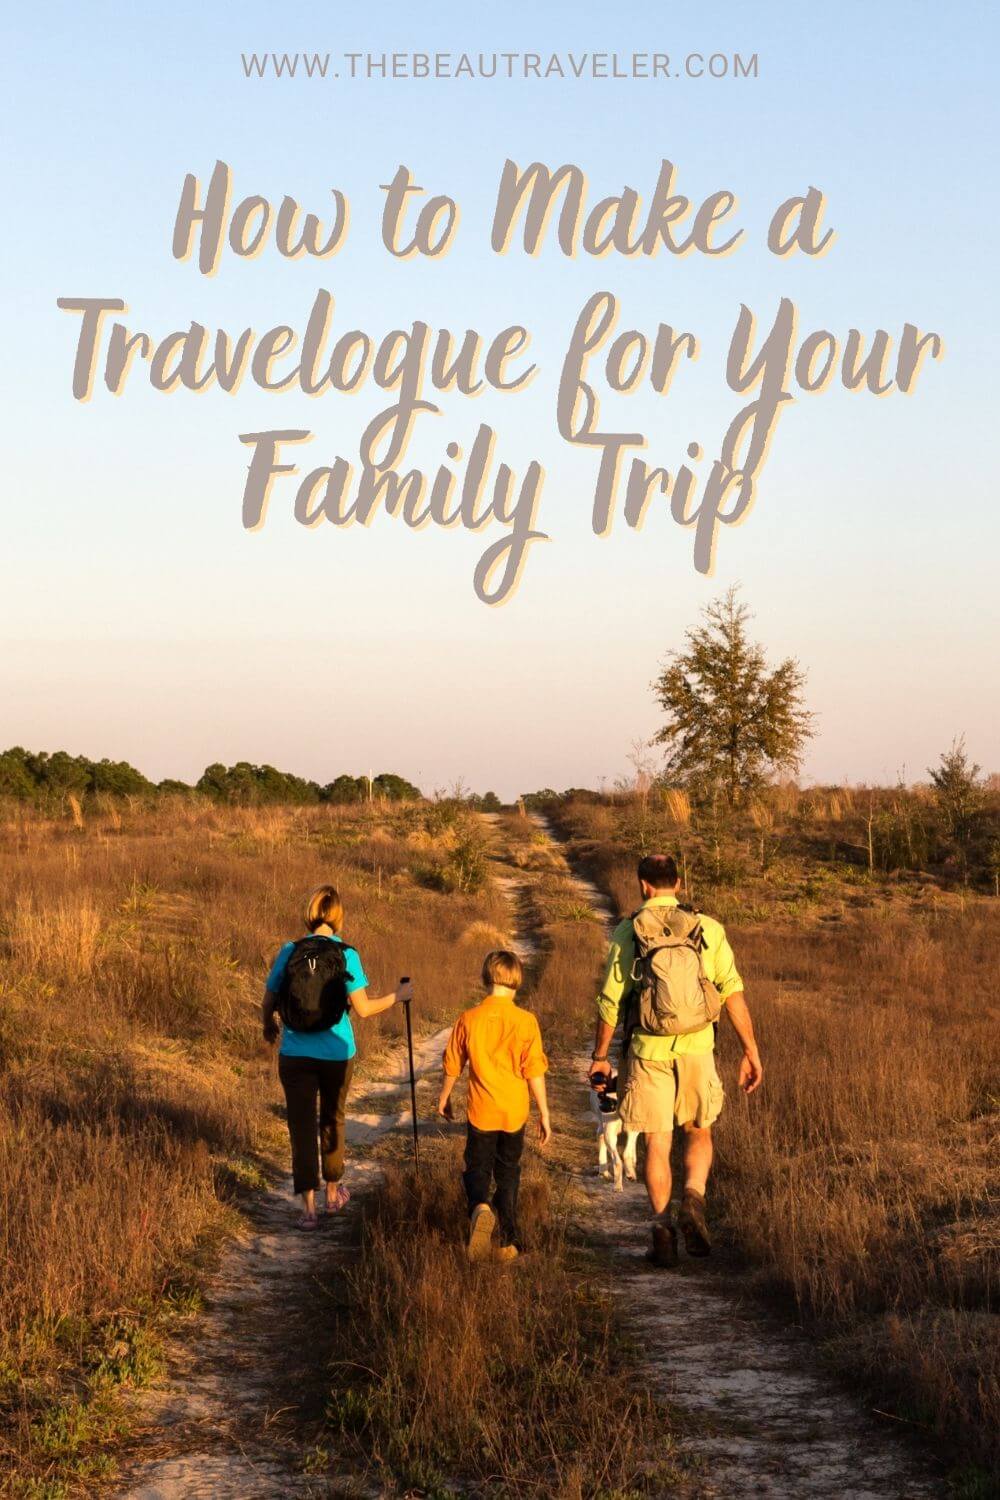 How to Make an Amazing Travelogue for Your Next Family Trip - The BeauTraveler